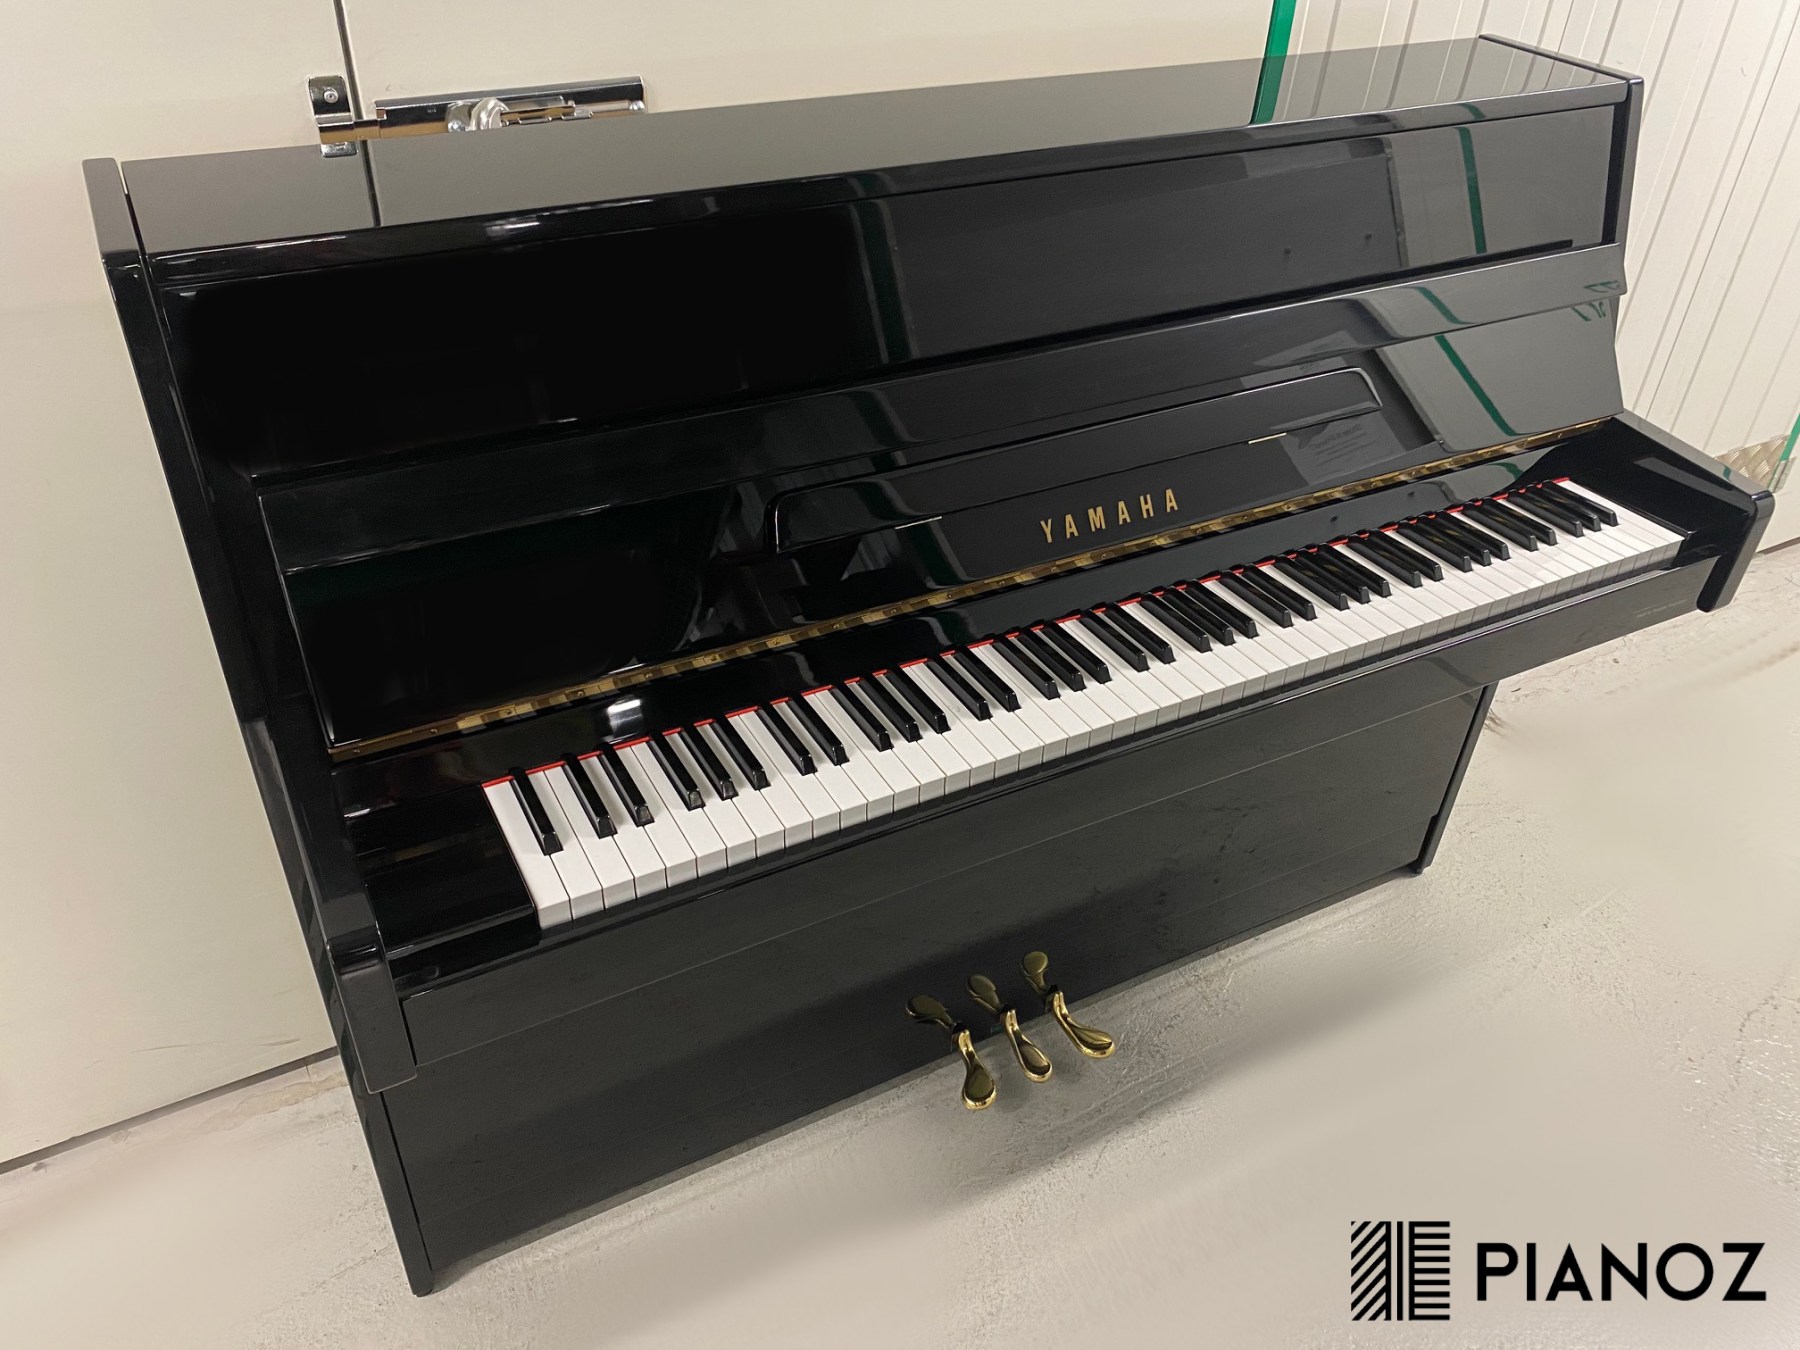 Yamaha C110 Black Upright Piano Upright Piano piano for sale in UK